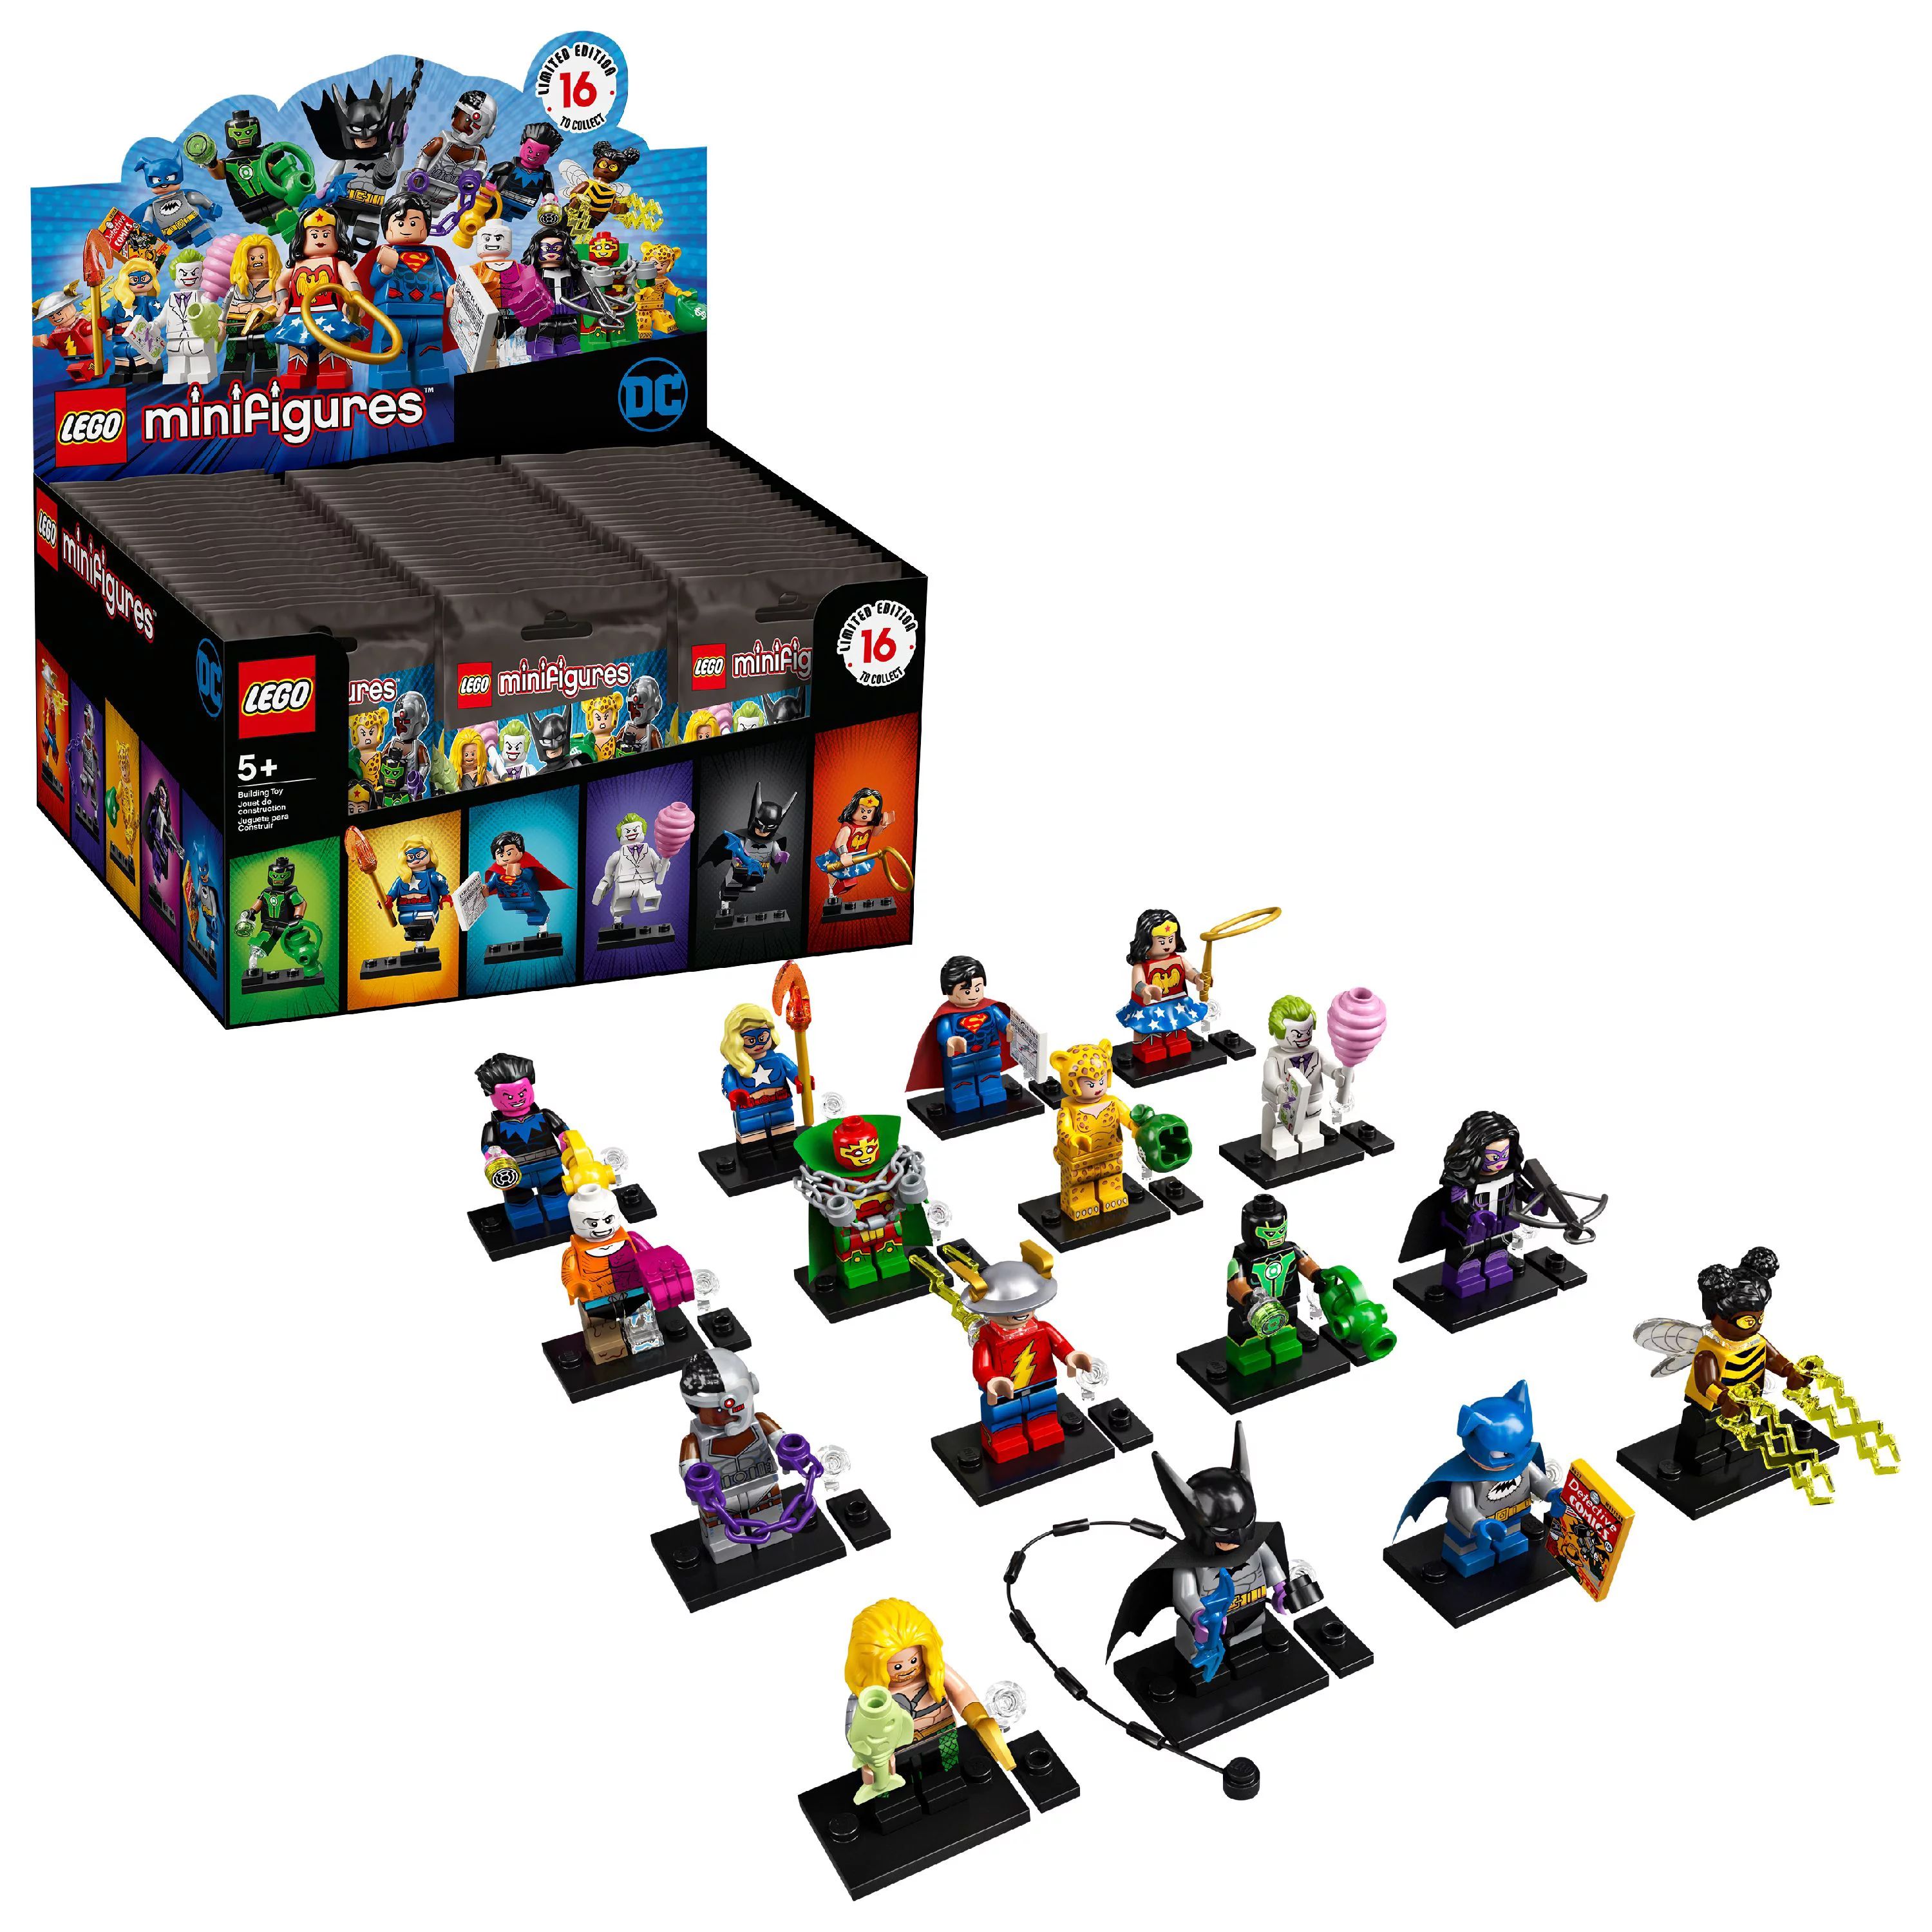 LEGO Minifigures DC Super Heroes Series 71026 Collectible Minifigures (1 of 16 to Collect) | Walmart (US)